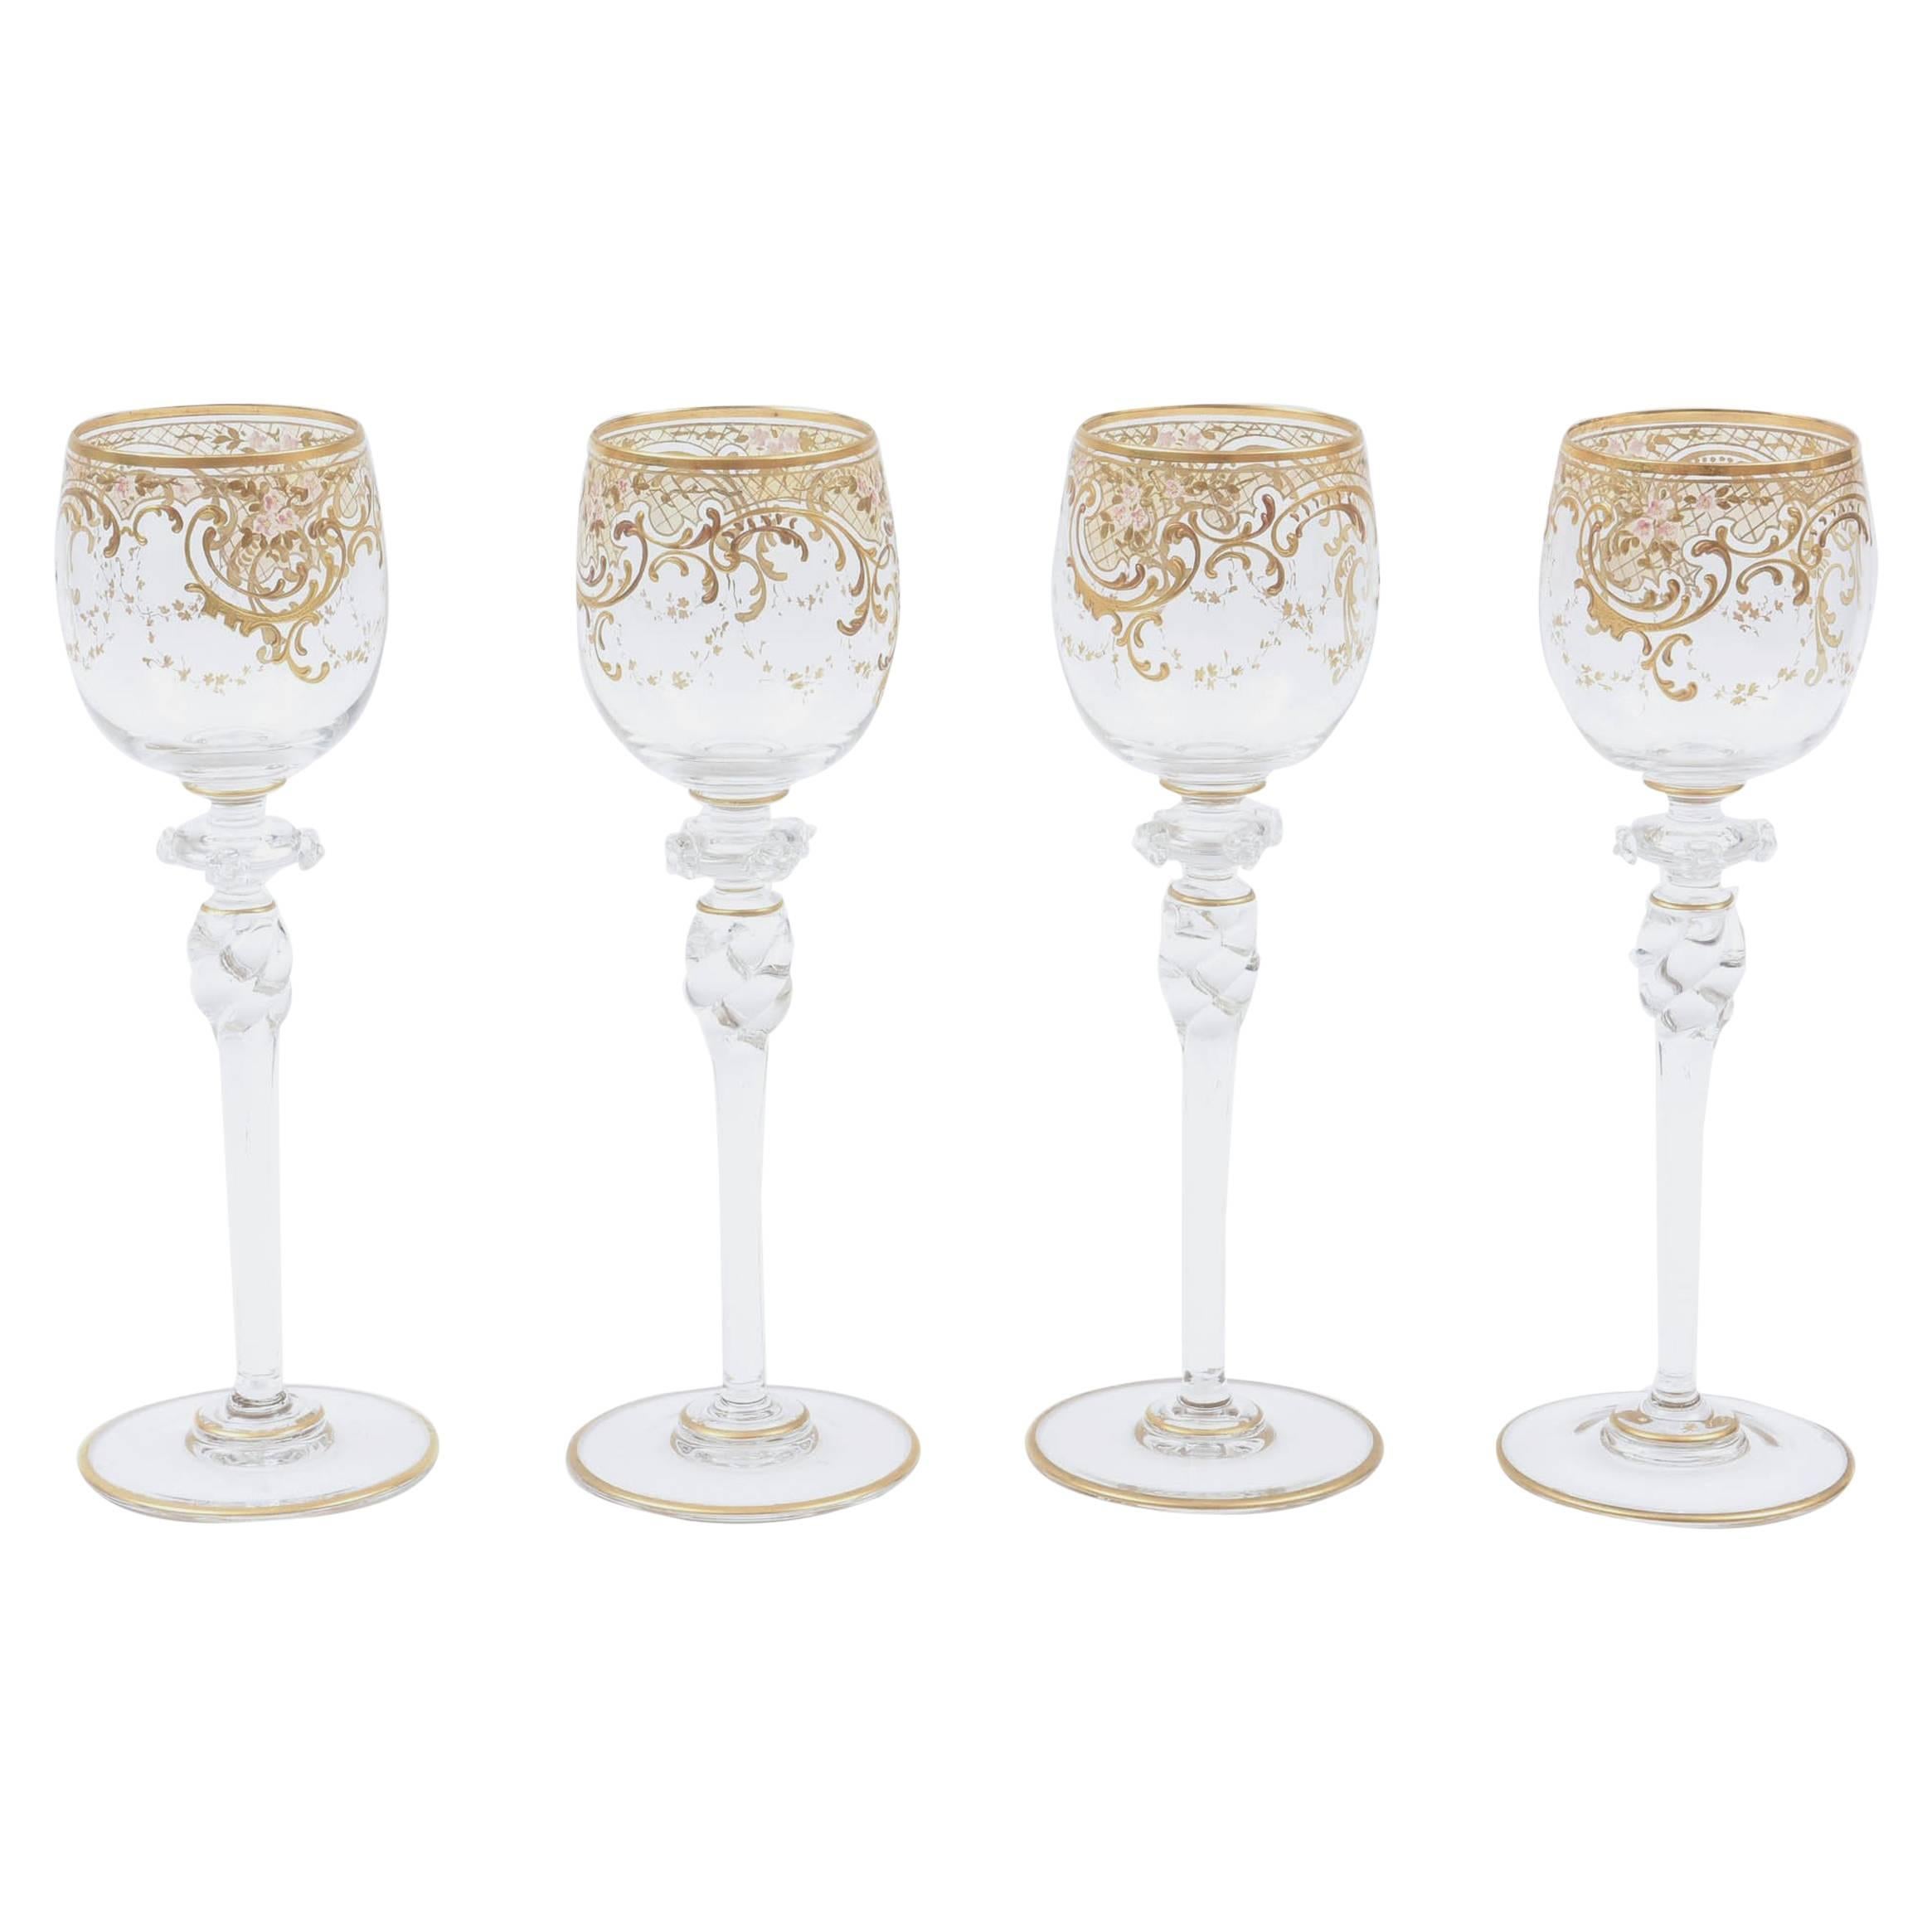 Four Tall Elegant Antique Moser Wine Goblets, Raised Gold & Hand-Painted Florals